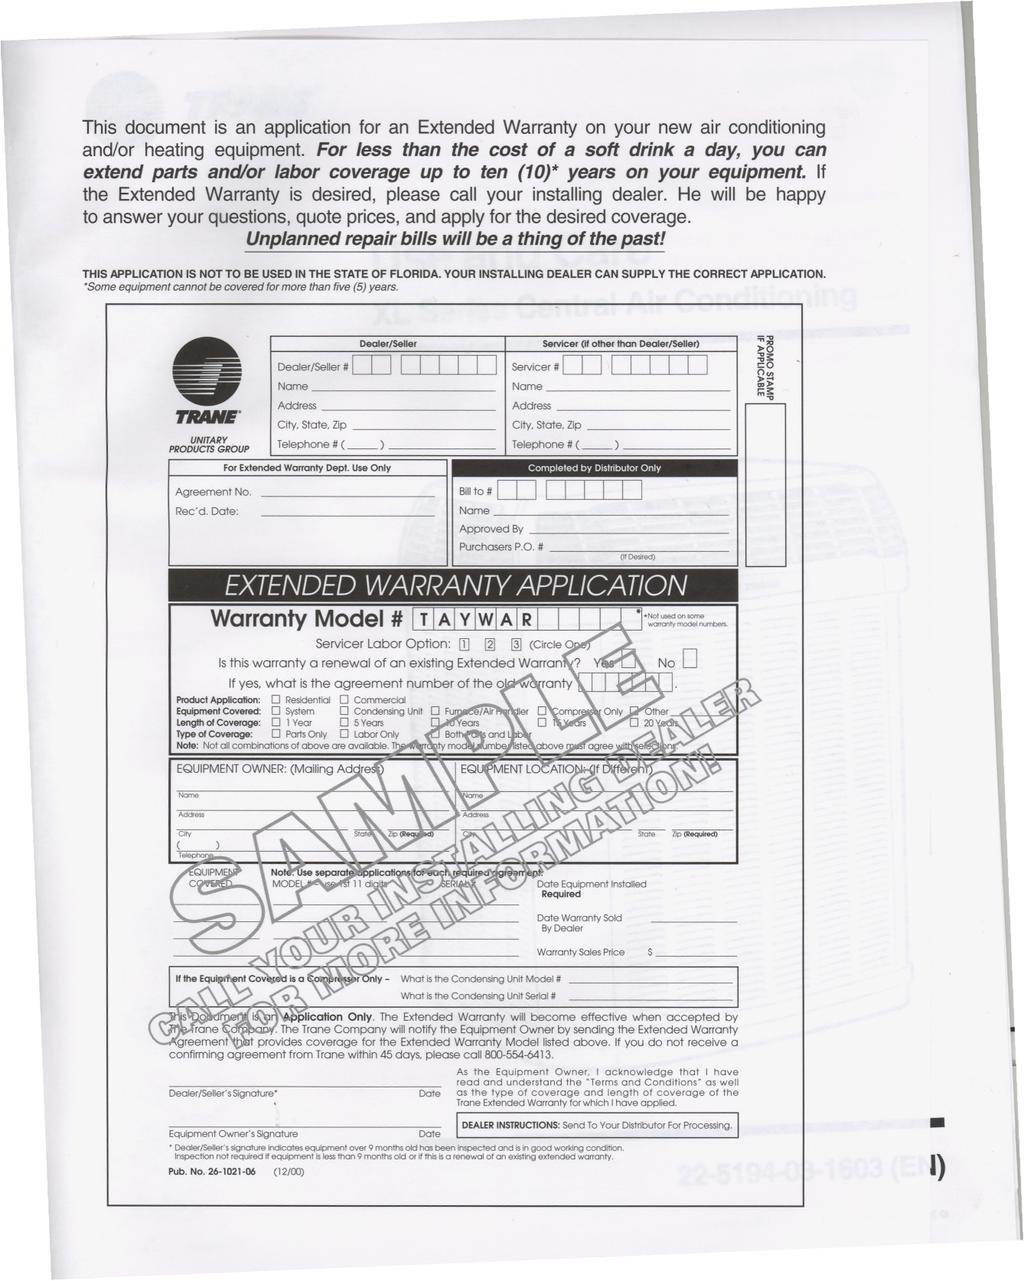 This document is an application for an Extended Warranty on your new air conditioning and/or heating equipment.